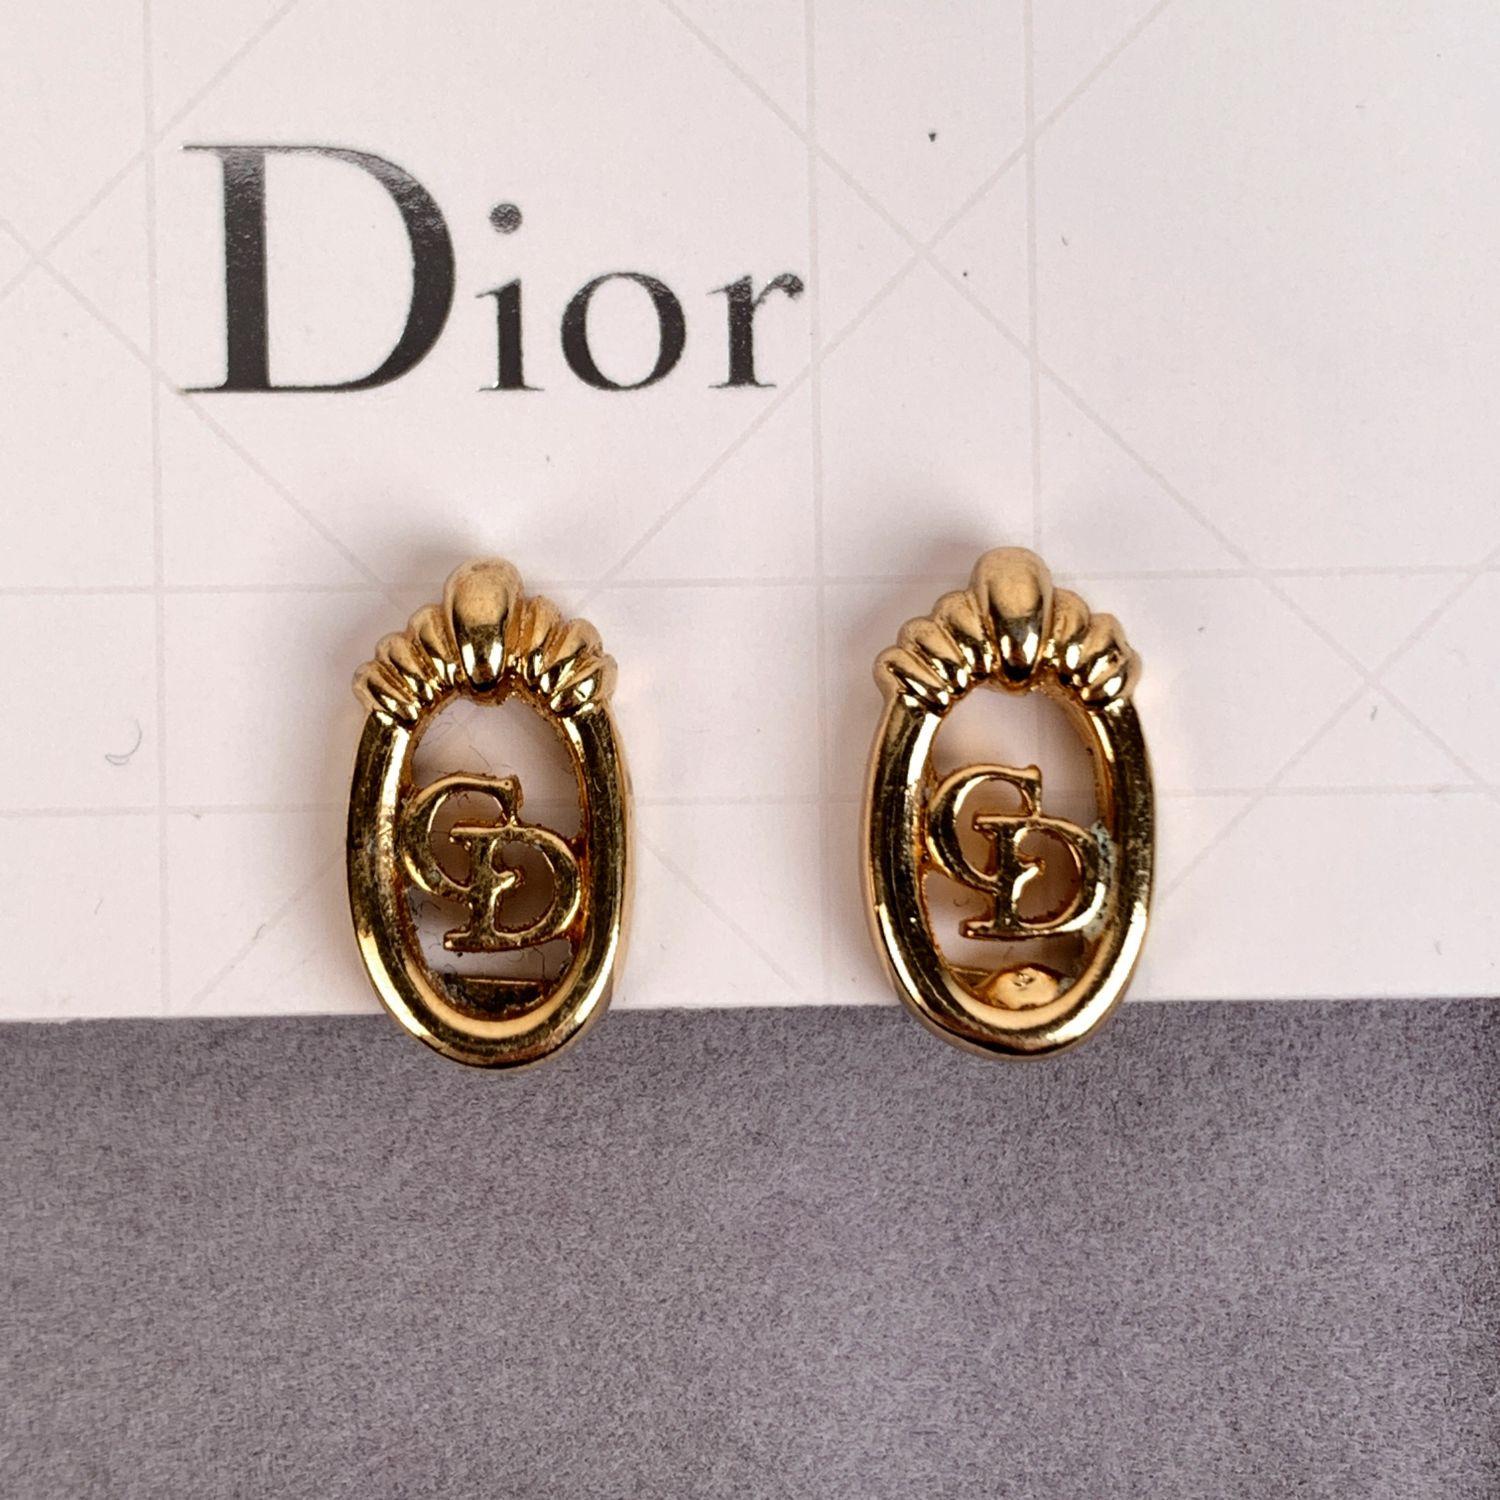 Beautiful earrings by Christian Dior. They are finely crafted in gold metal and feature a oval-shape and CD logo in the center. Clip on closure on the back. 'CH.DIOR Germany' engraved on the reverse of the earrings. Height: 15 mm



Condition

A -